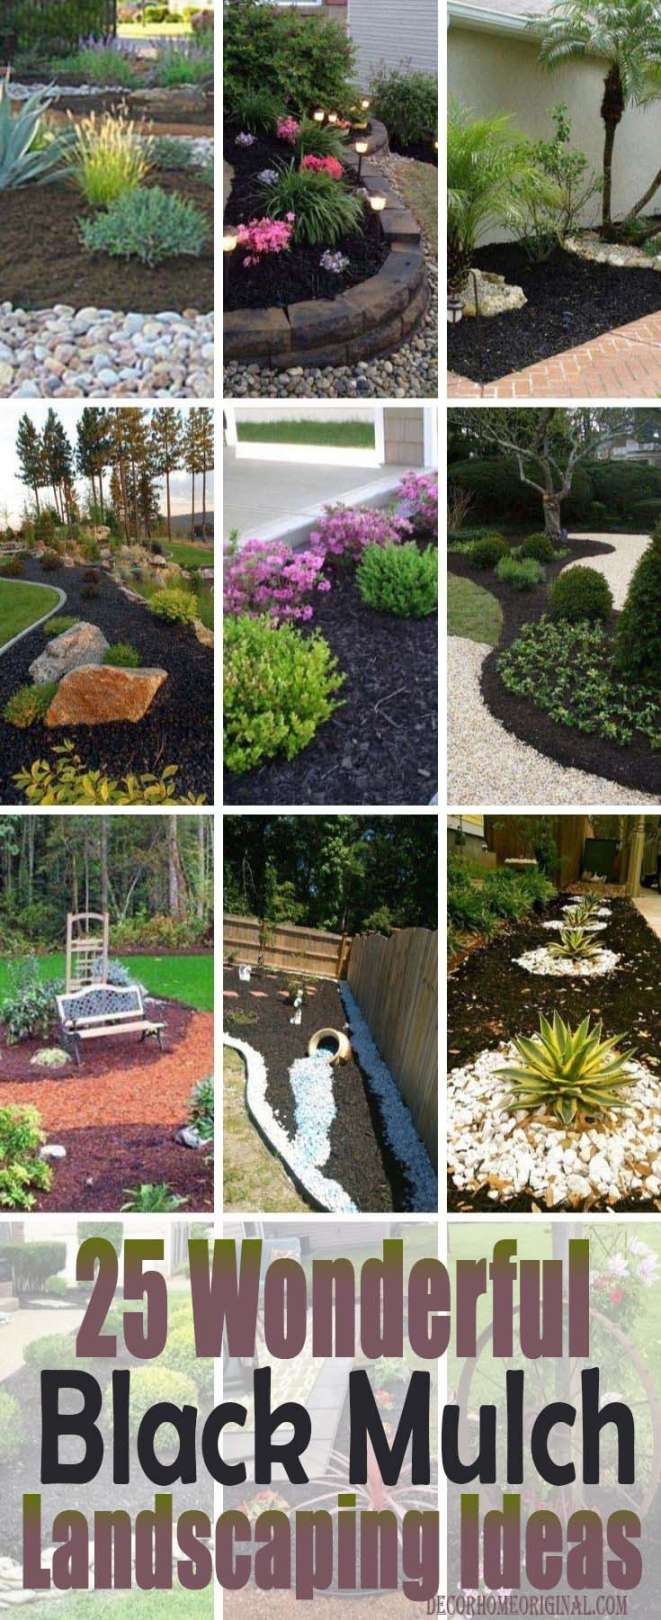 Wonderful Black Mulch Landscaping Ideas To Craft The Perfect